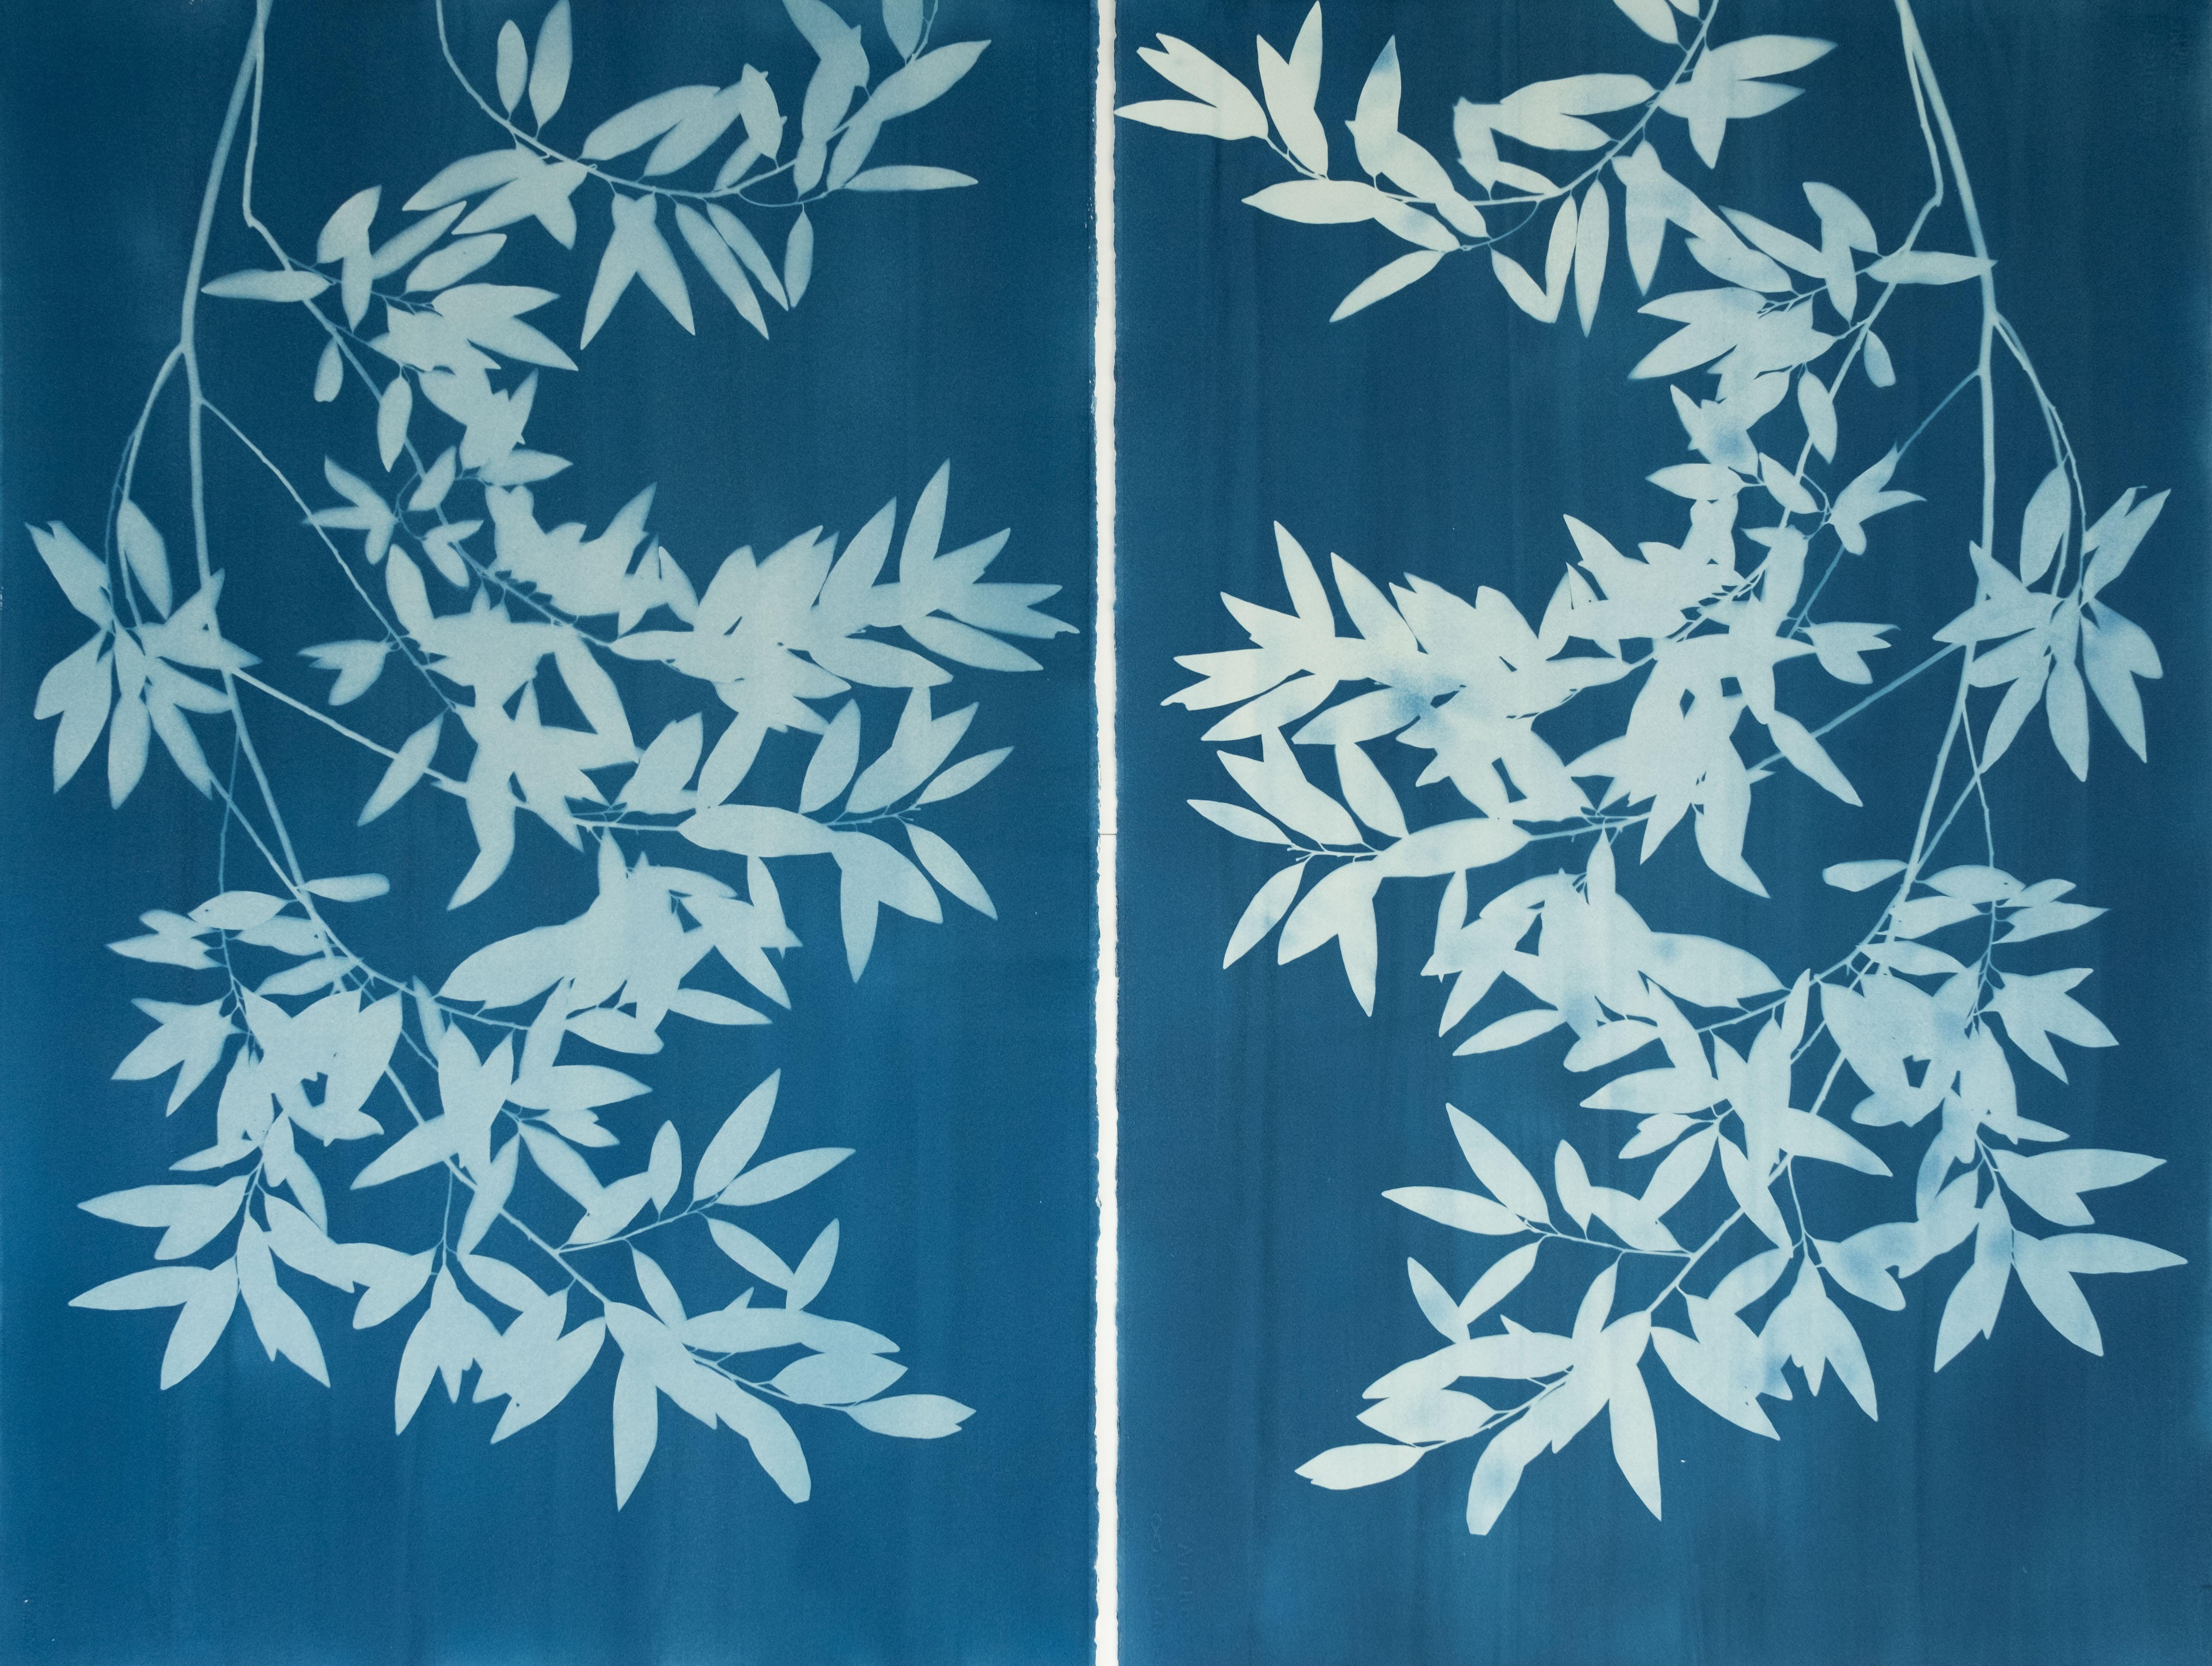 Bay Laurel Diptych (Hand-printed cyanotype, 40 x 52 inches combined)